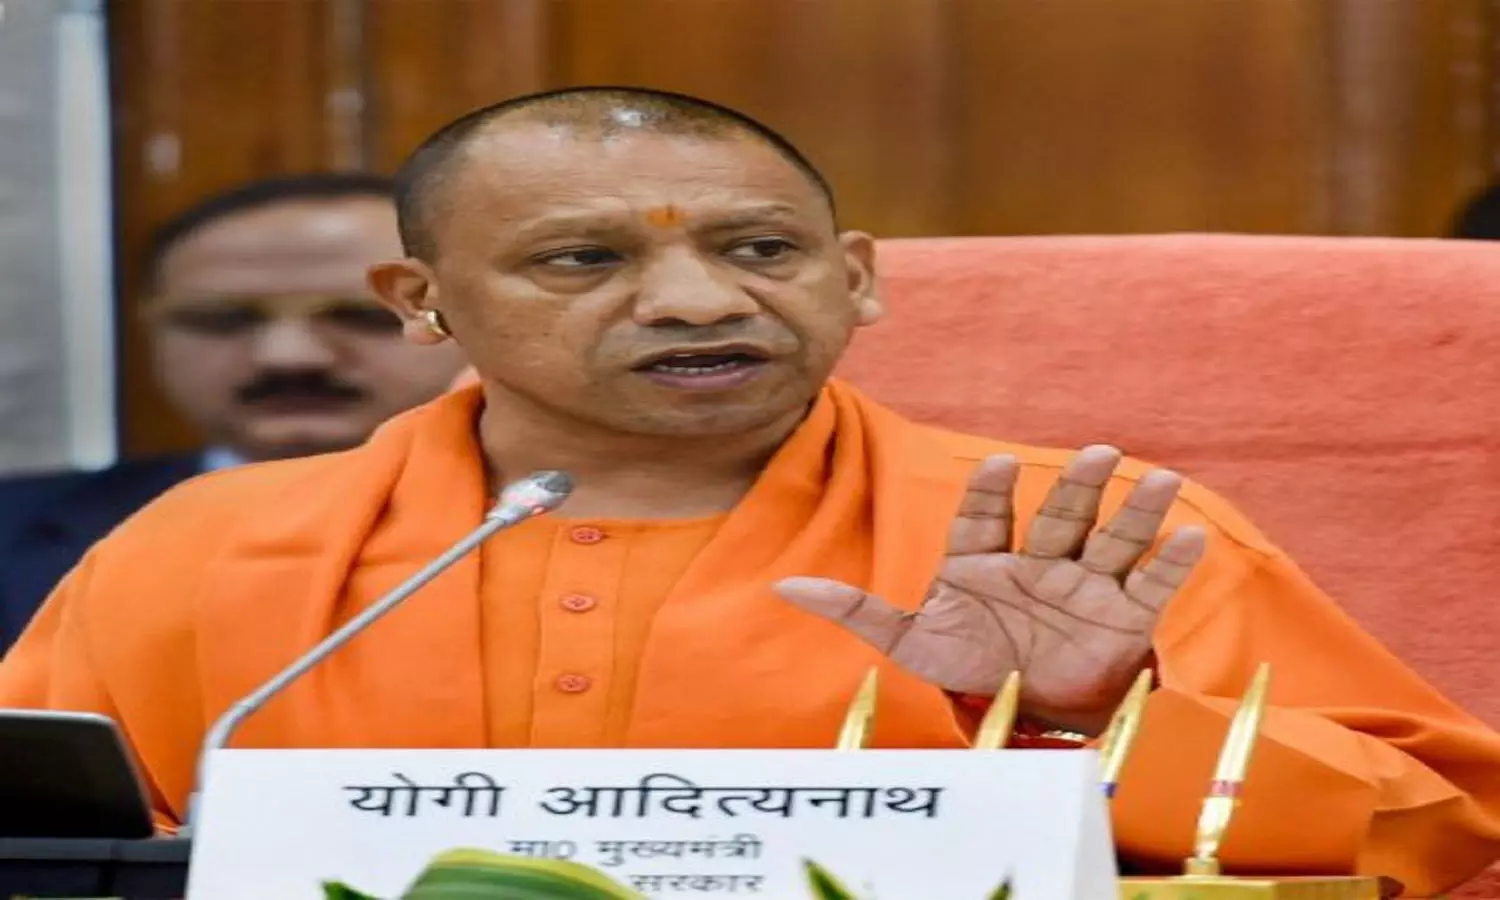 No shortage of oxygen in any private or govt Covid hospital in UP: Yogi Adityanath